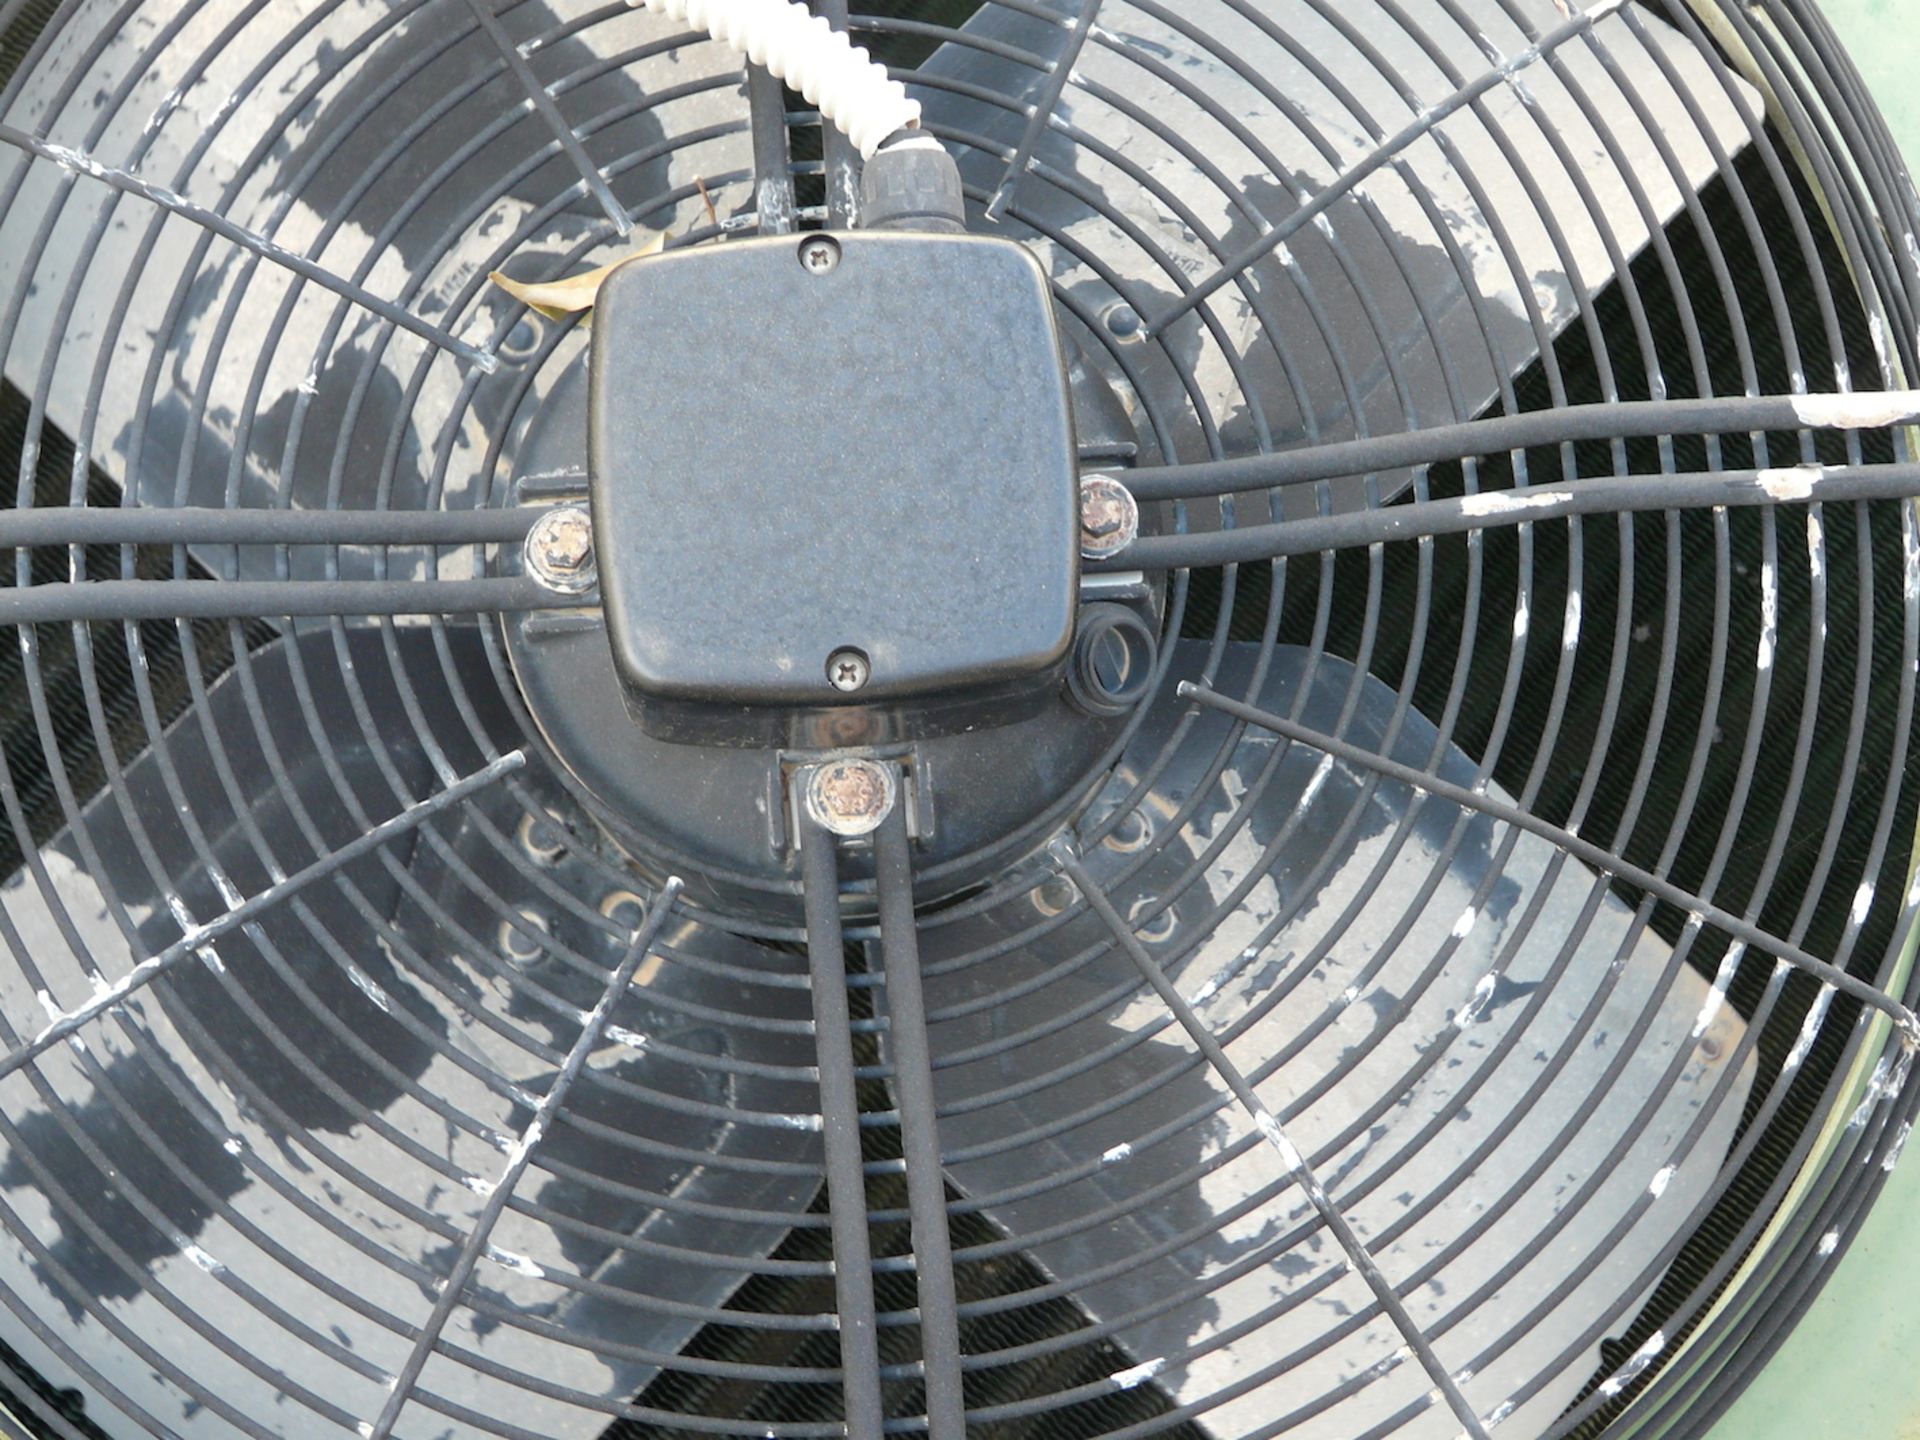 English: Condenser with 4 fans (one is out of order) 180m³ Used for Cold Rooms Greek: Κοντέσερ - Image 8 of 9